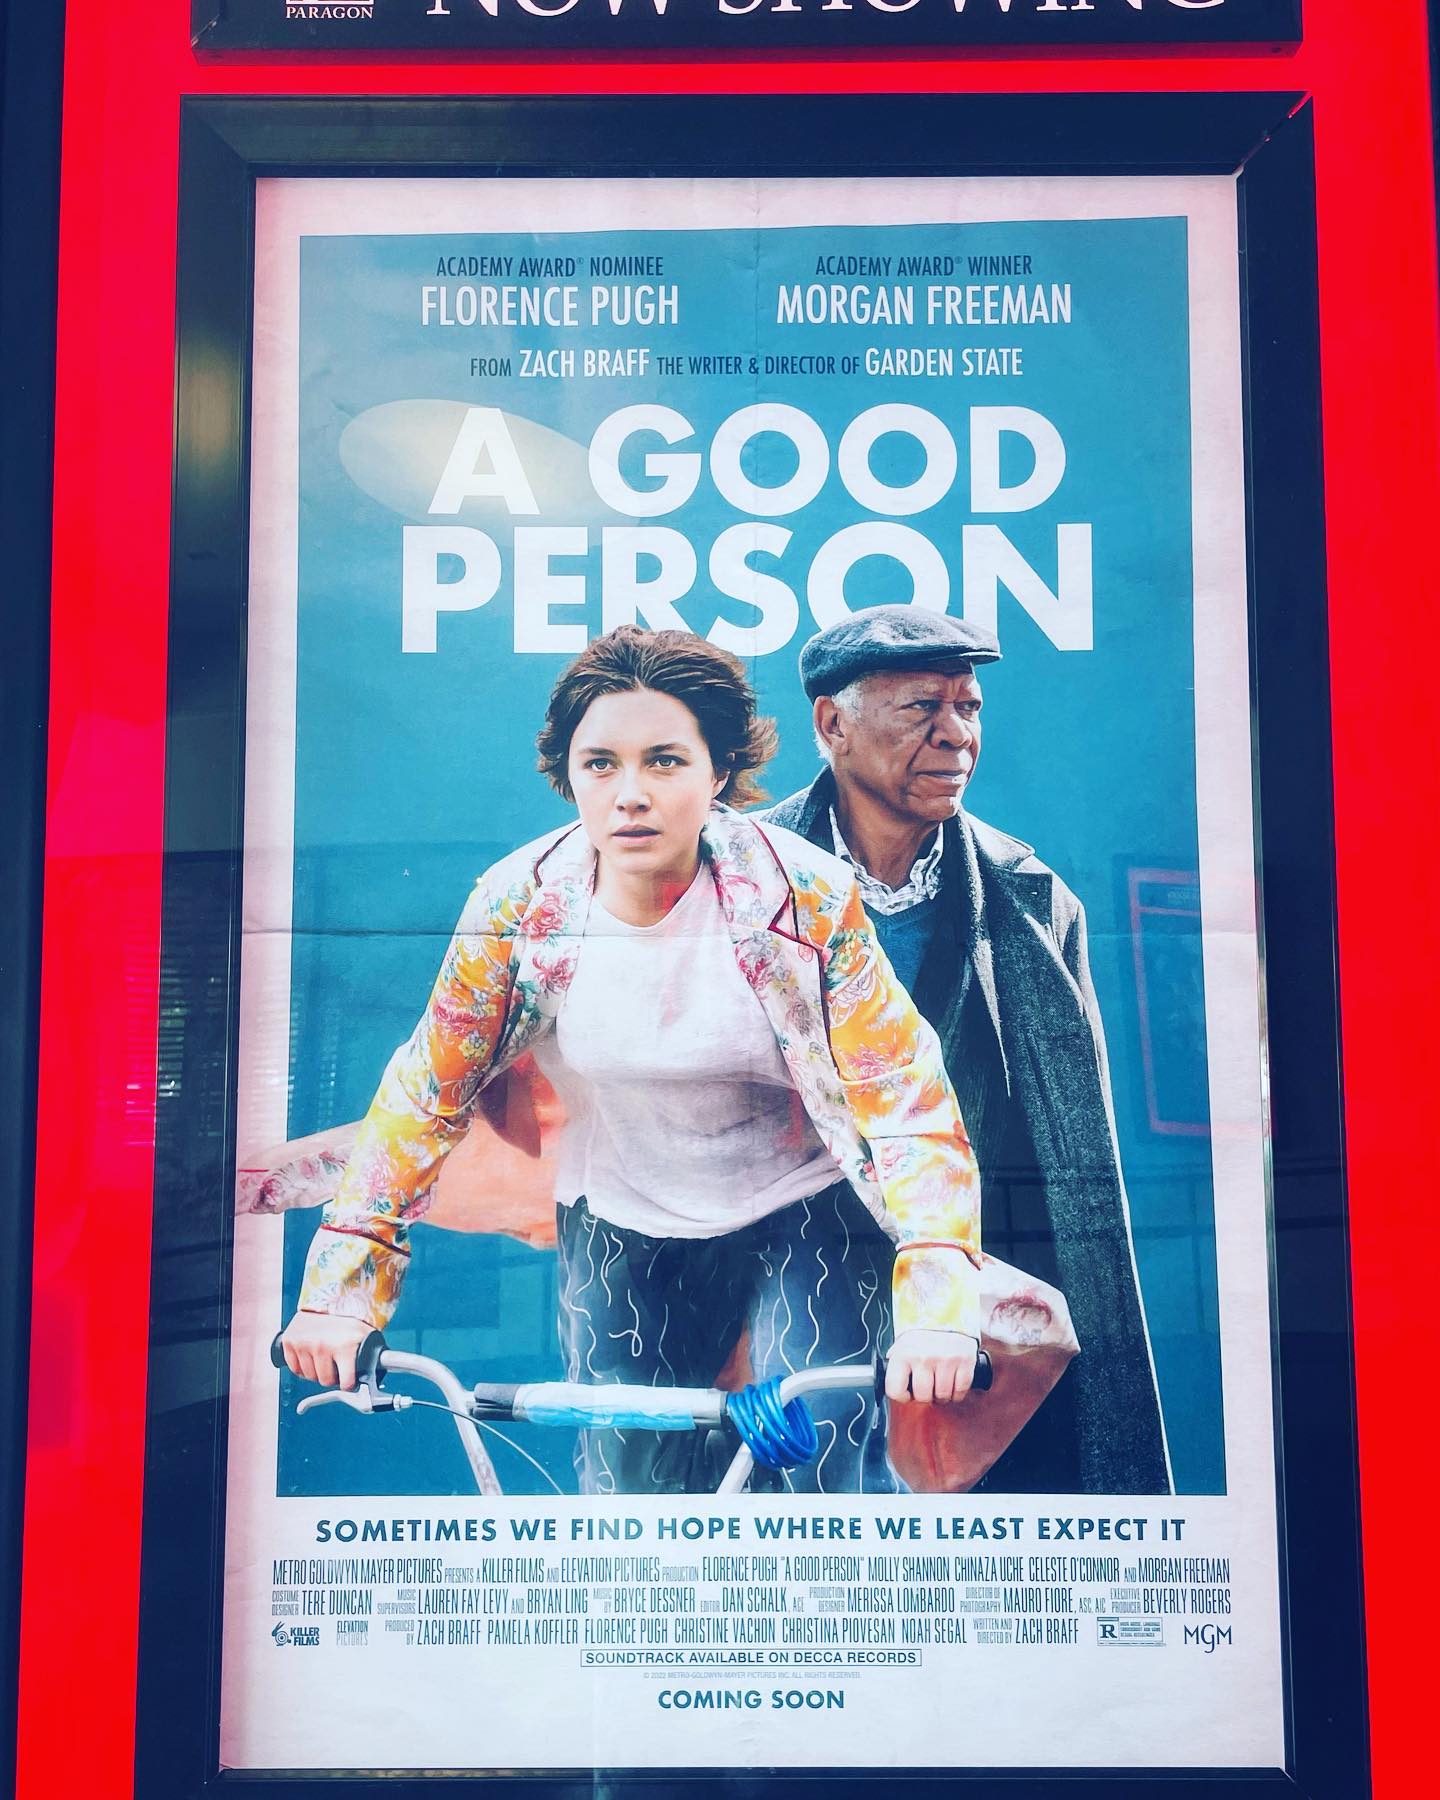 I went to see this must see movie today in Naples with my Mom, wow! I work in the field of addiction so thank you @zachbraff for bringing this story and including Hollywood legend @morganfreeman OMG & @florencepugh with her unbelievable five-star acting 😭 and let’s not forget her Mom @theofficialsuperstar